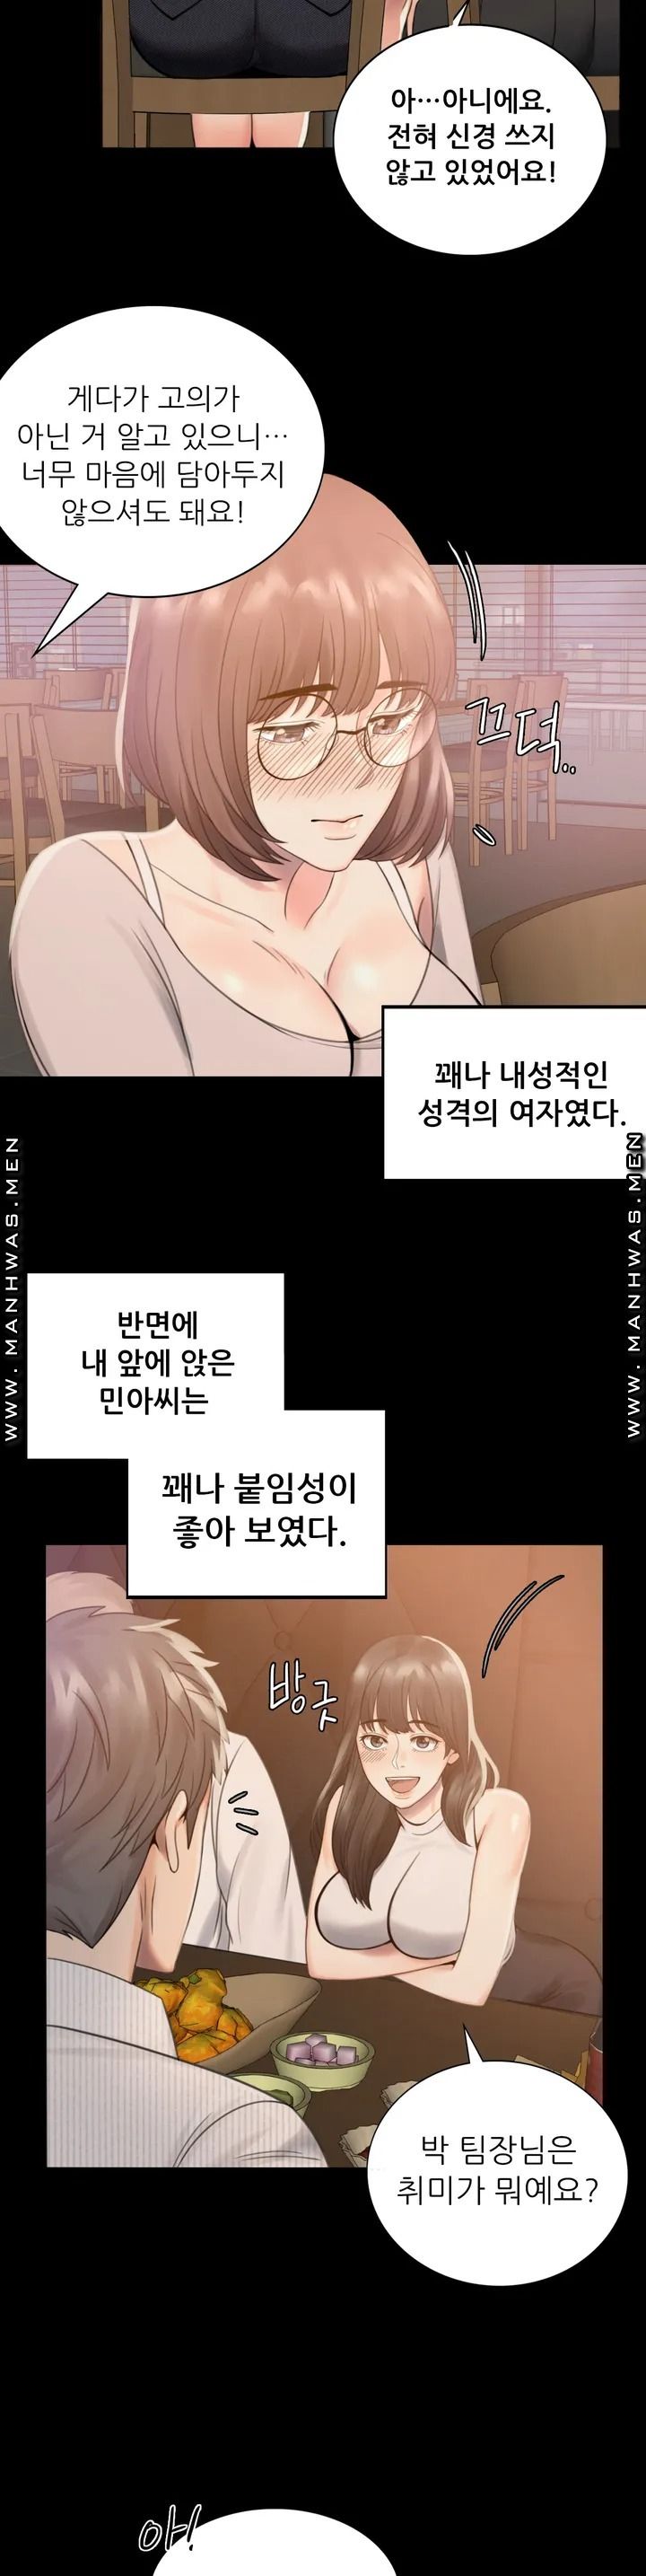 illicitlove Raw - Chapter 1 Page 57